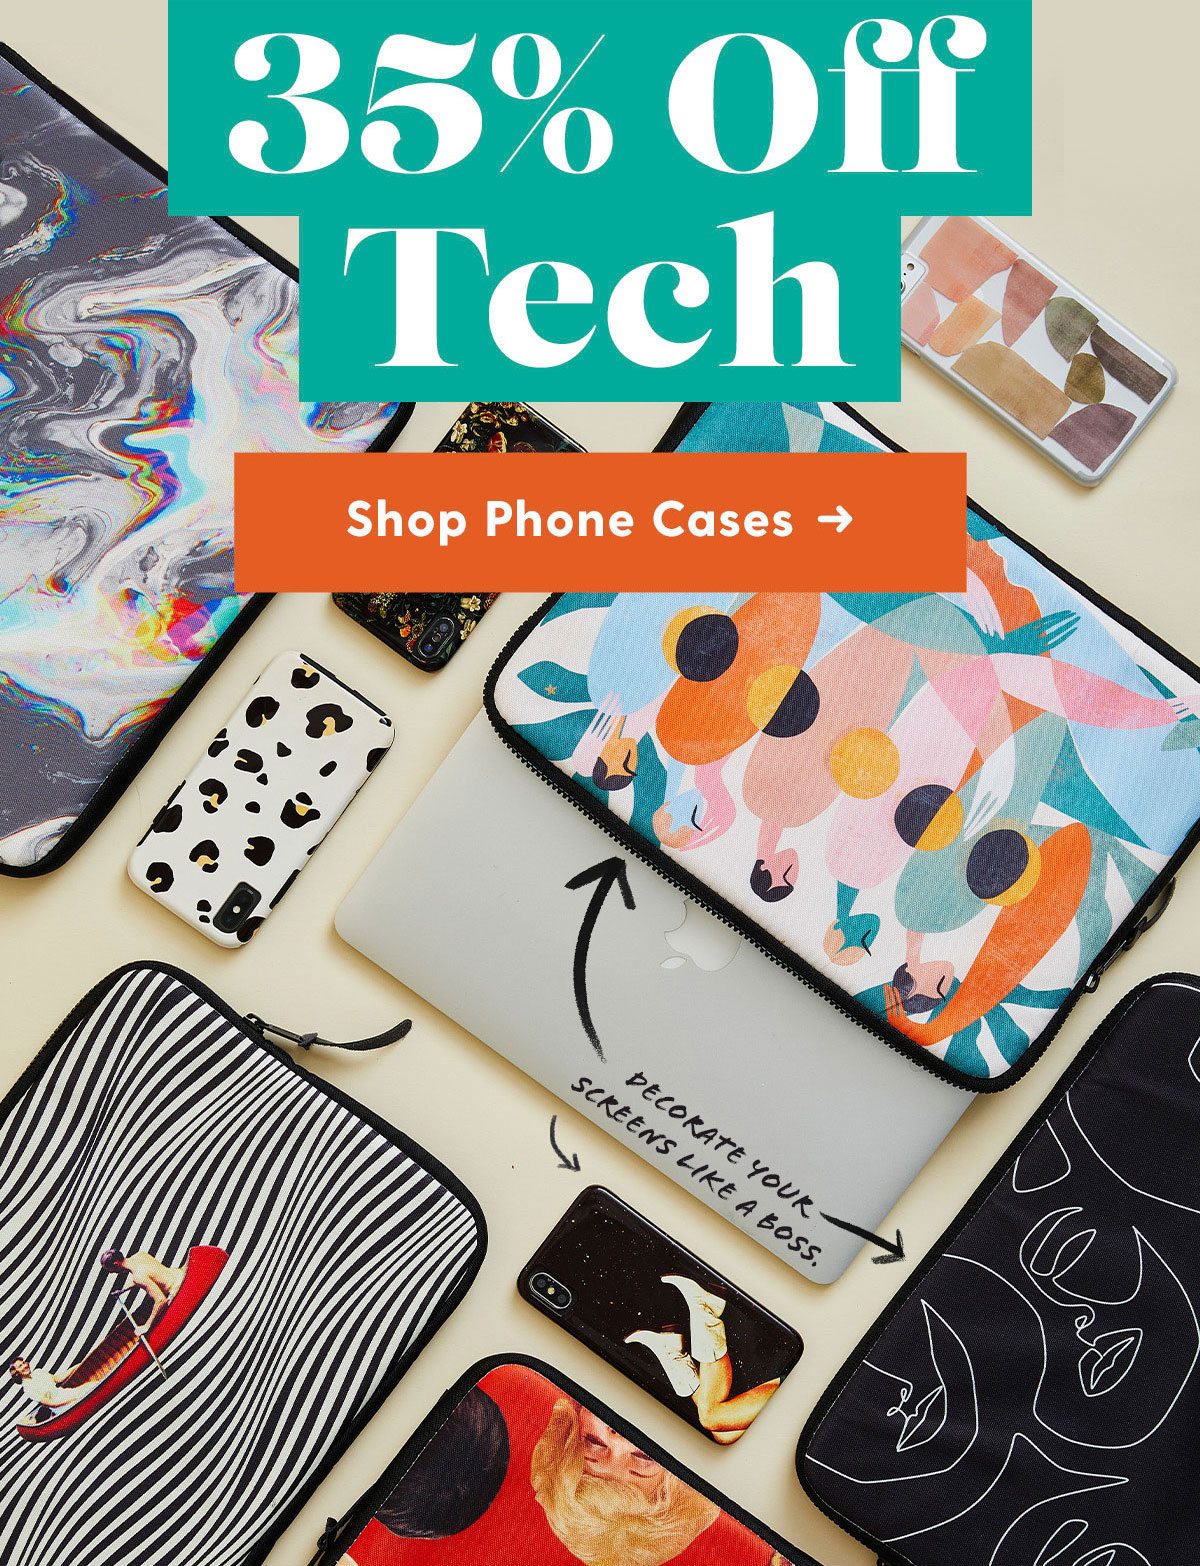 35% Off Tech. Decorate your screens like a boss. Shop Phone Cases →